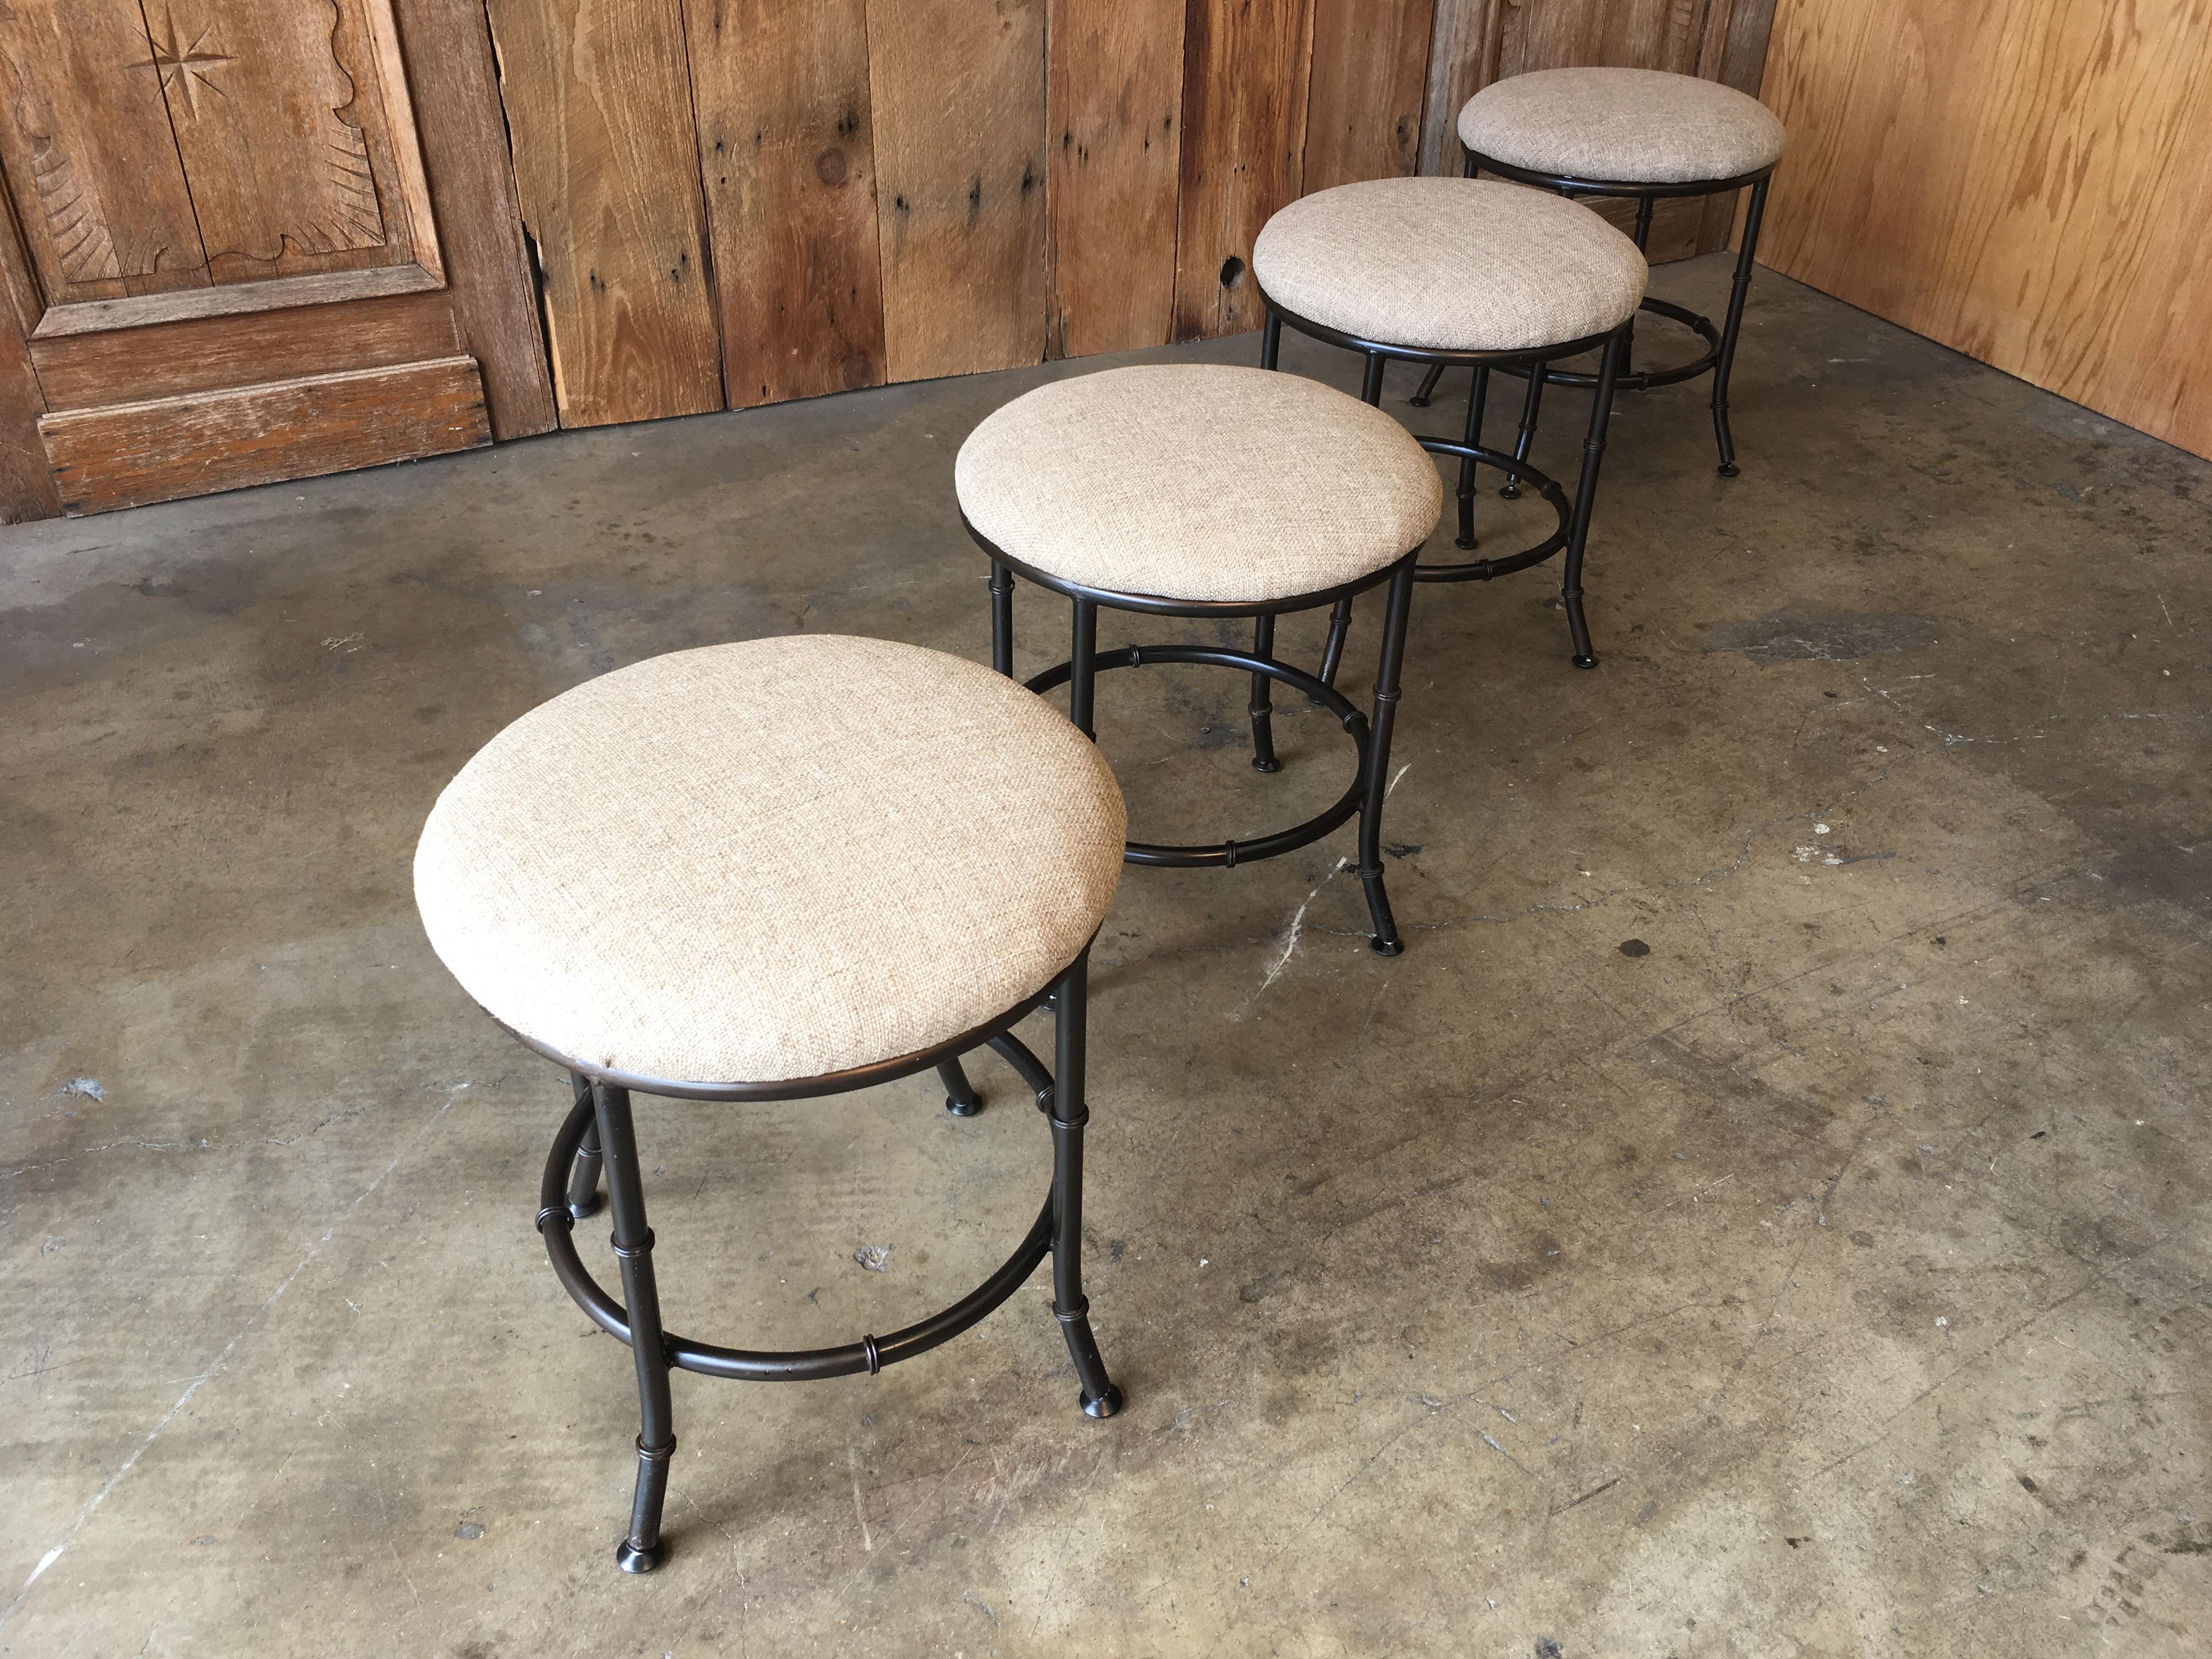 Faux bamboo stools in a bronze finish.